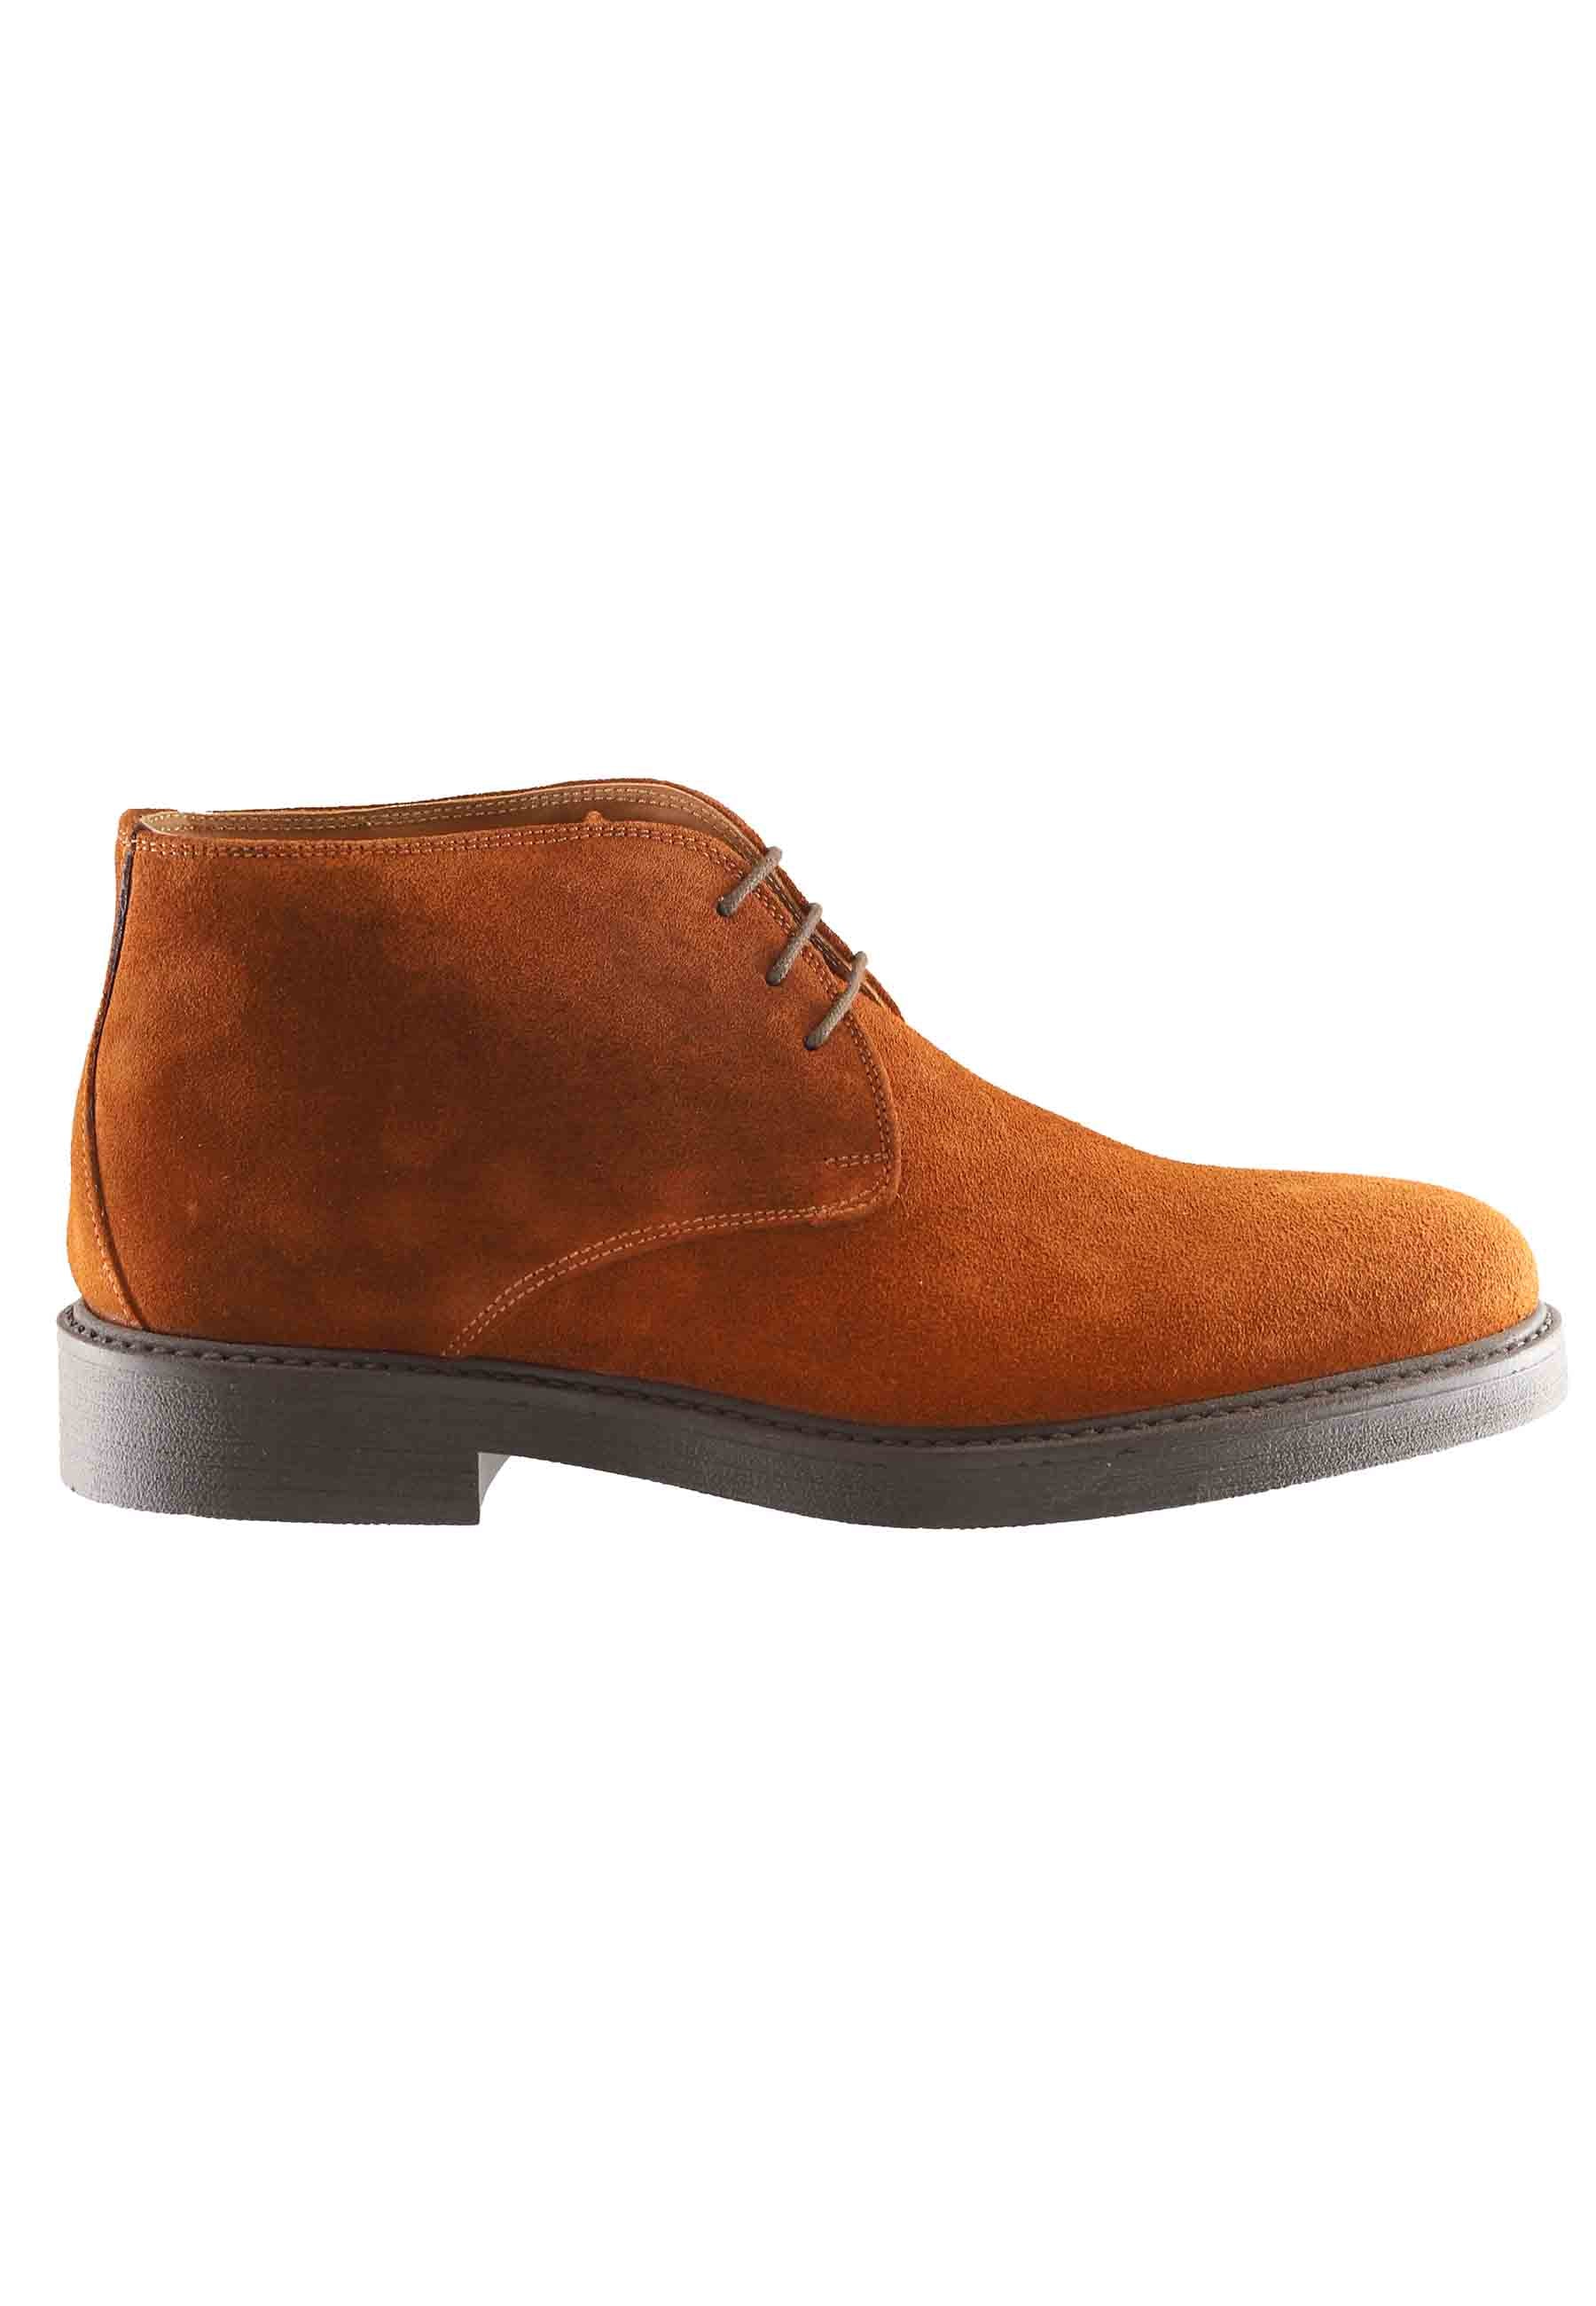 Men's rust suede ankle boots with rubber sole